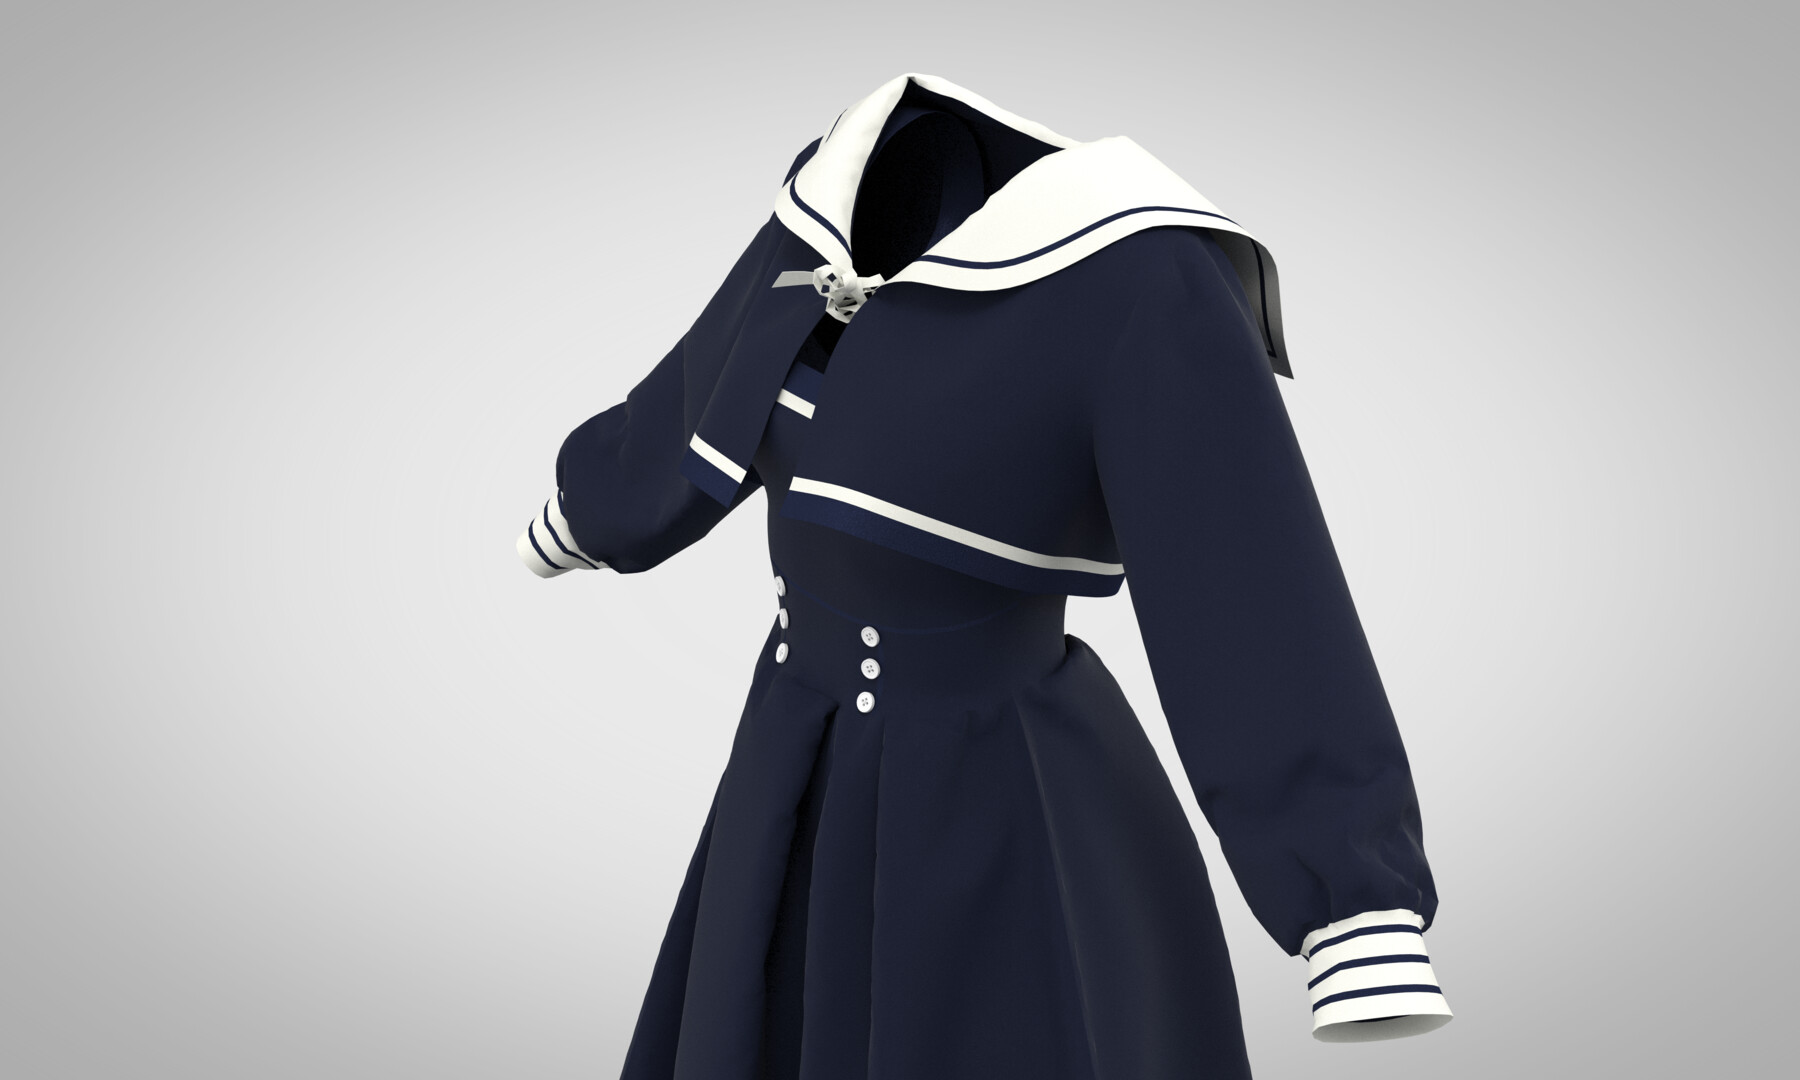 ArtStation - Dress in a marine style with a collar. | Game Assets